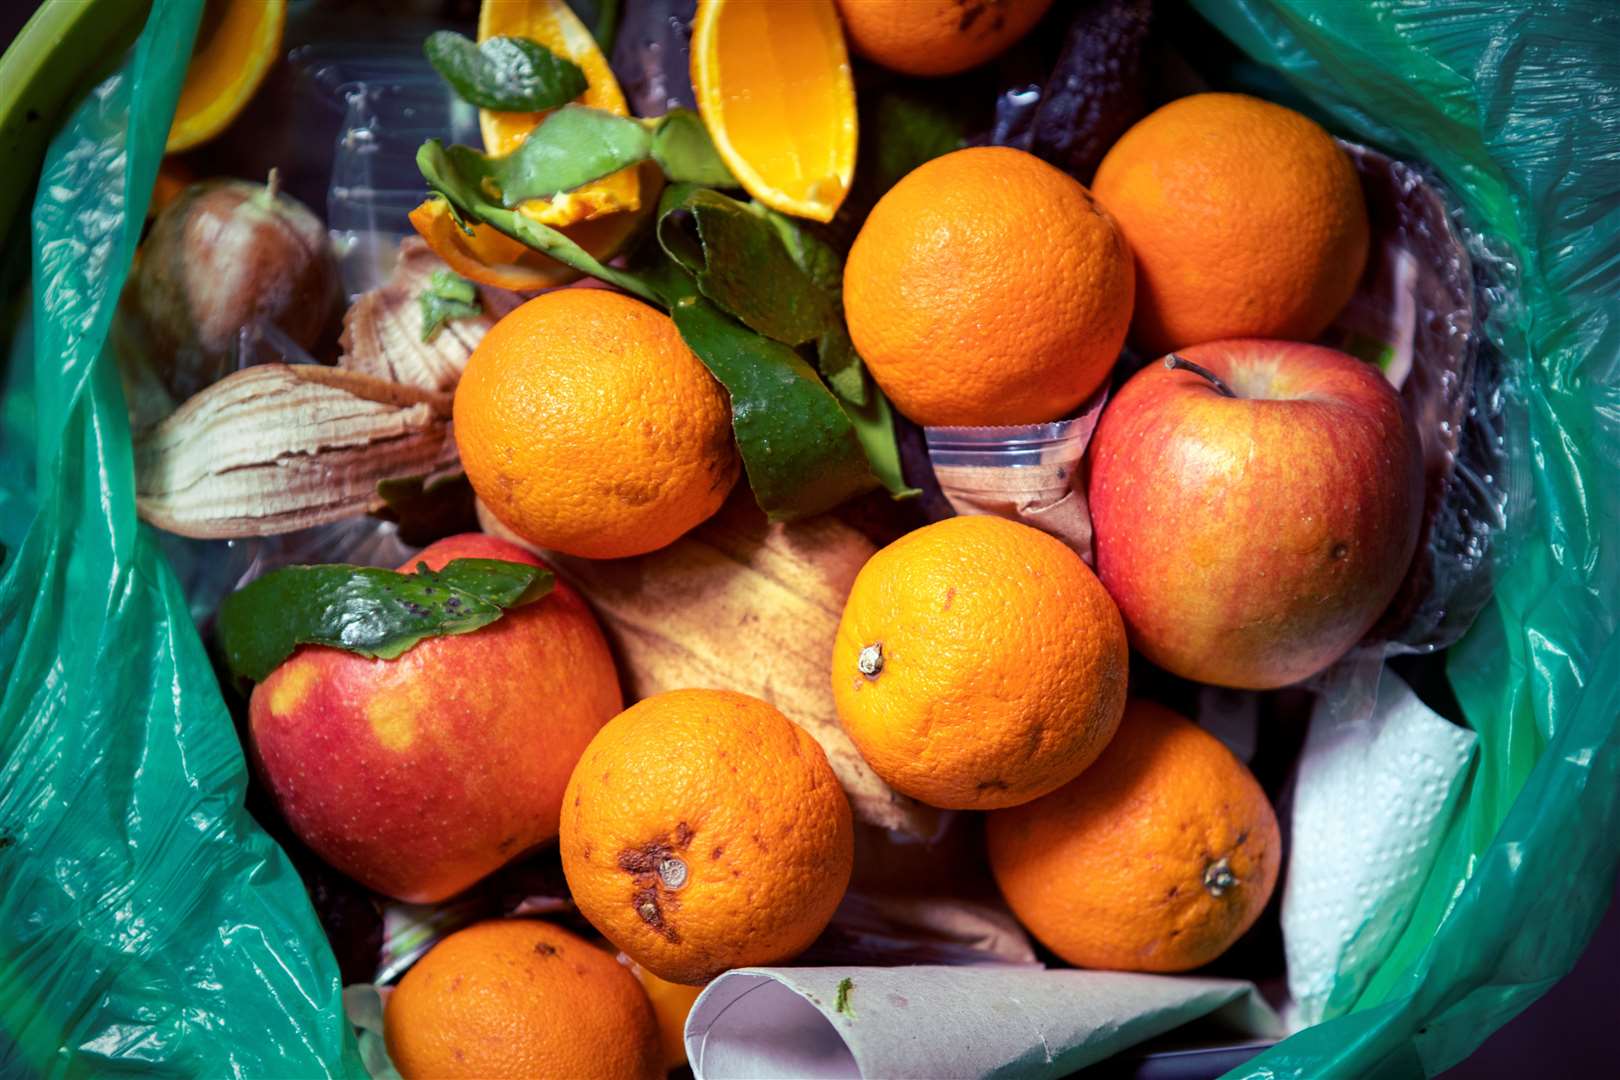 Councils wil be expected to always conduct weekly food waste collections. Image: iStock.